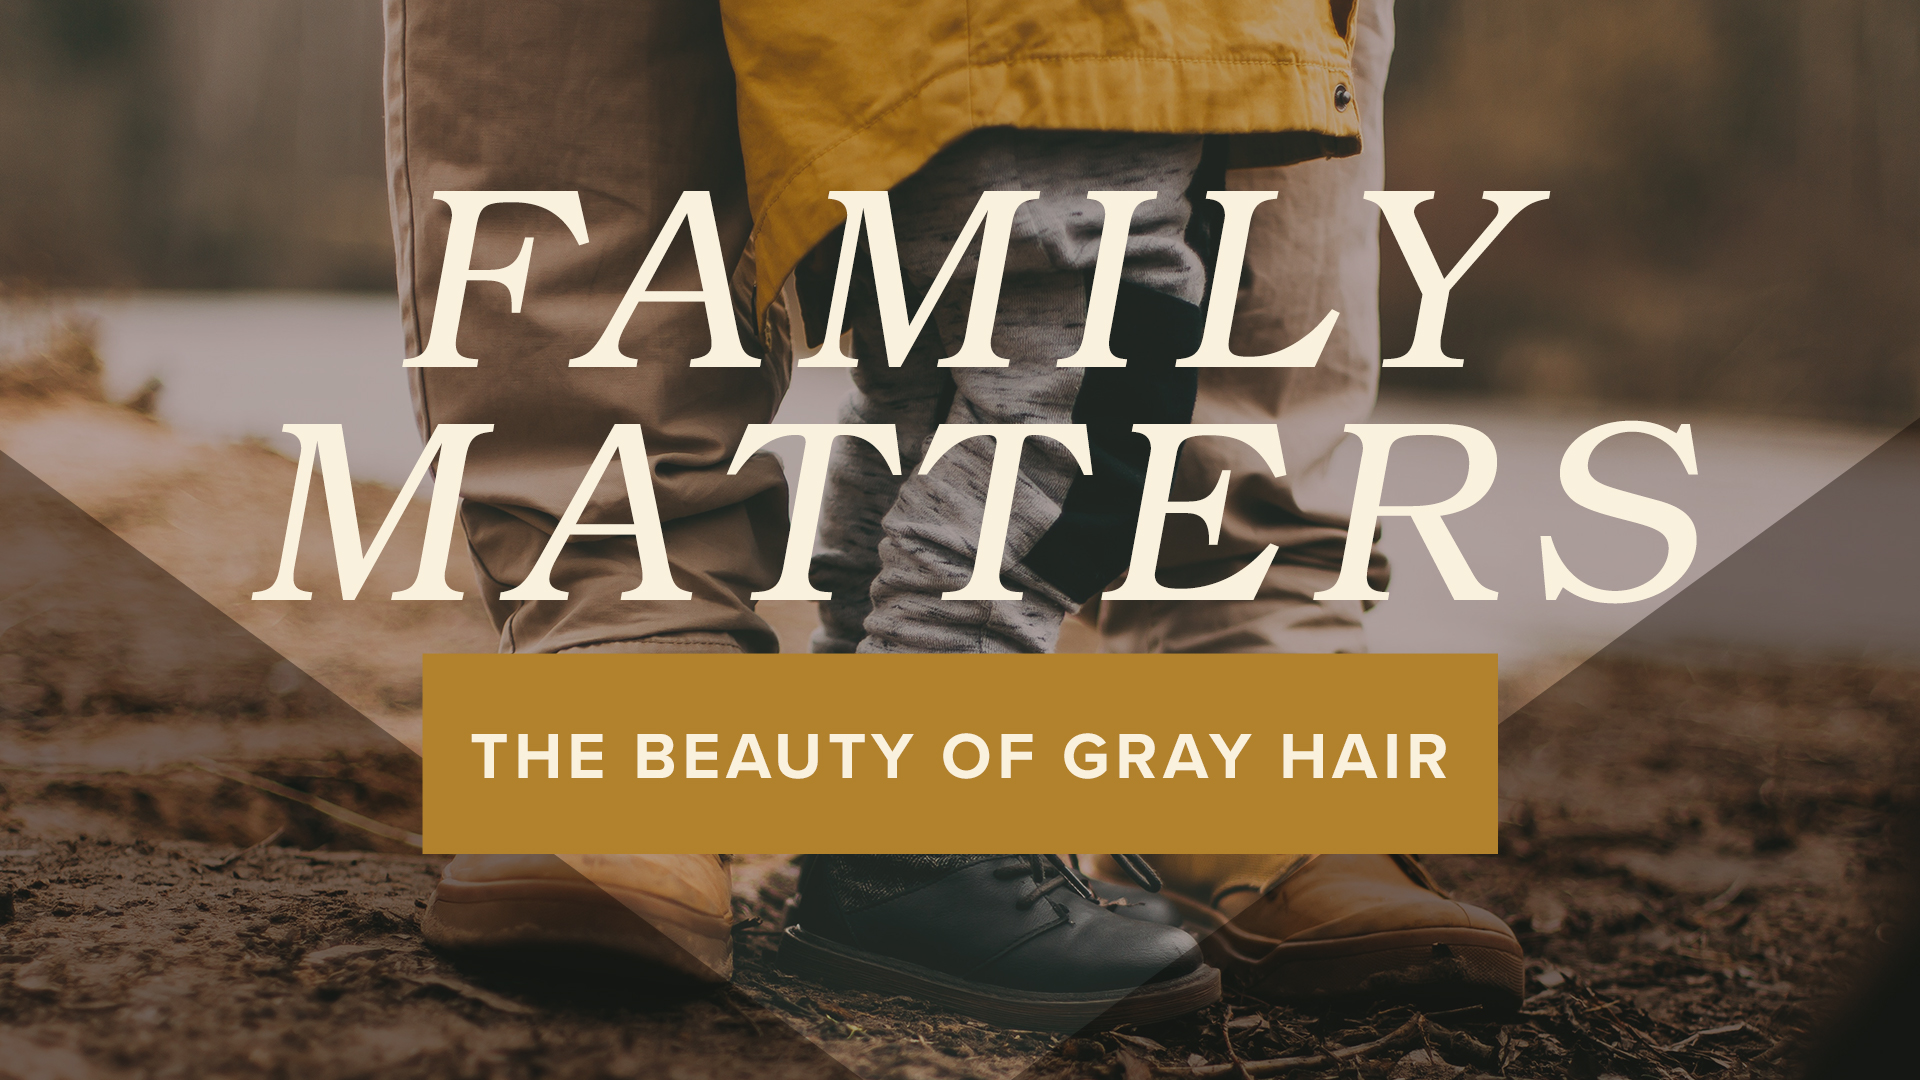 The Beauty of Gray Hair Image